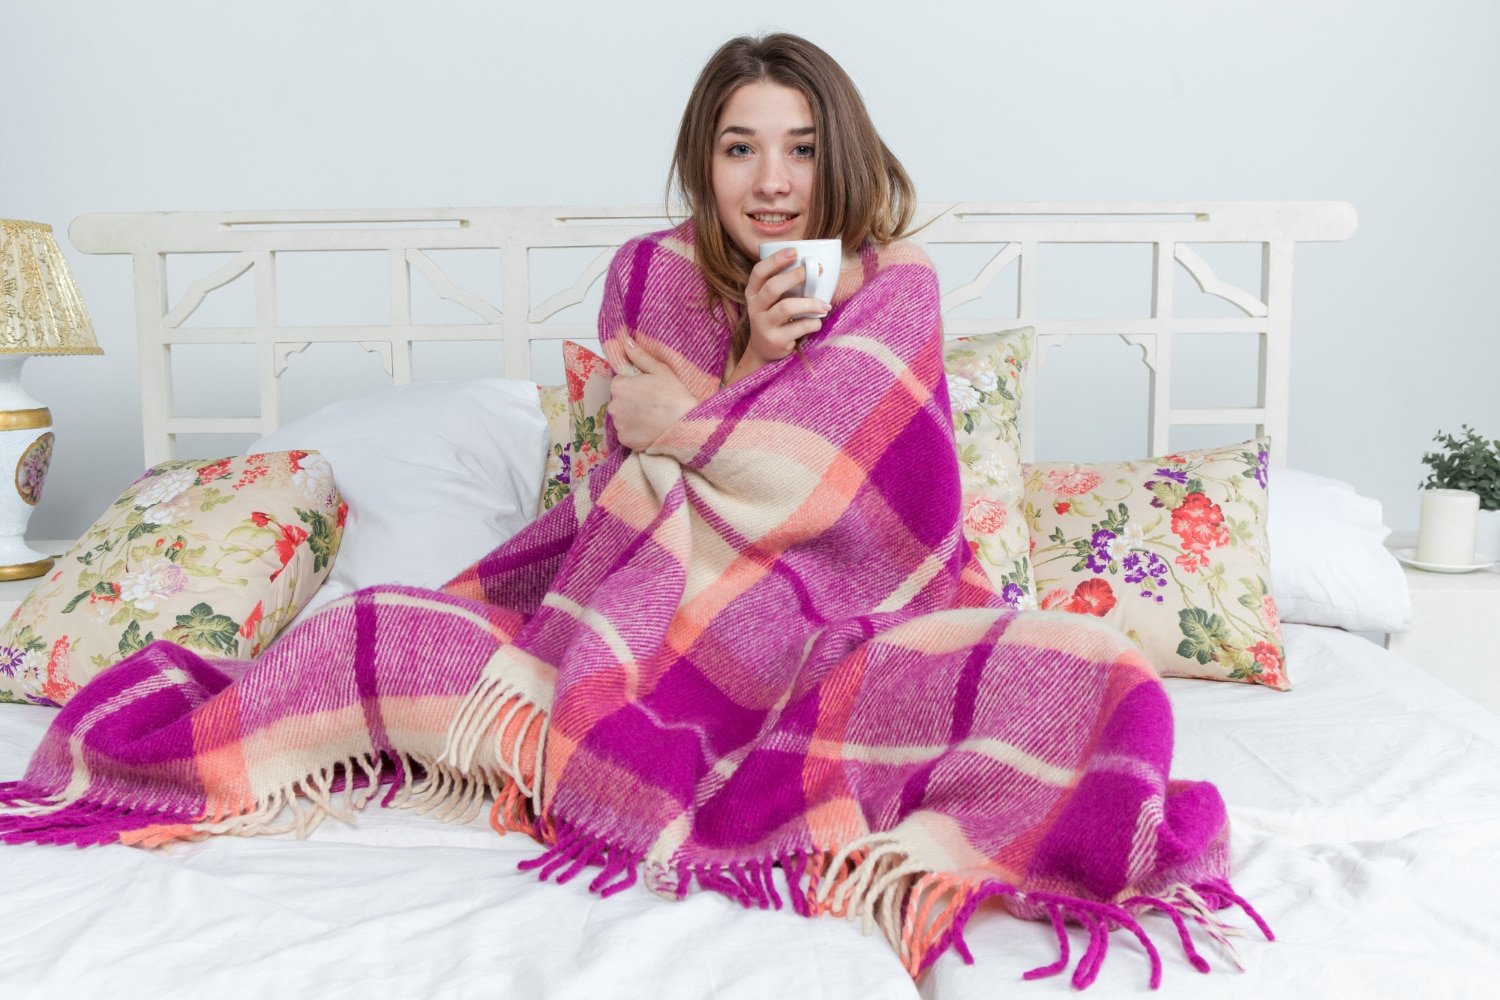 Wrap Up In Luxury With Saranoni Luxury Blankets’ Plush Throws